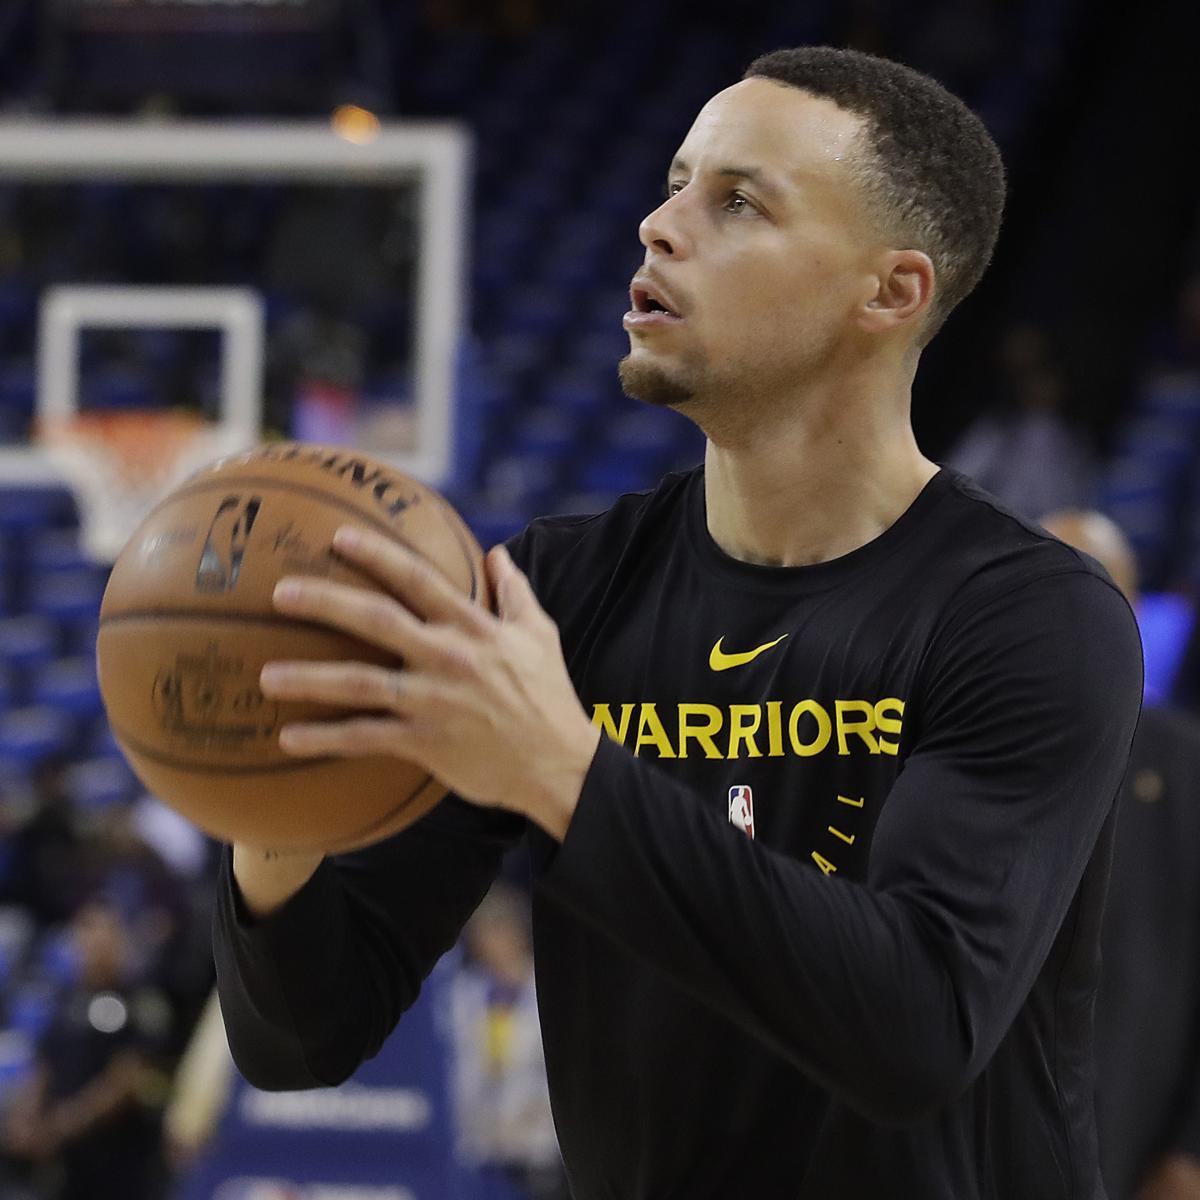 Girl's letter to Steph Curry on Under Armour sneakers: We play